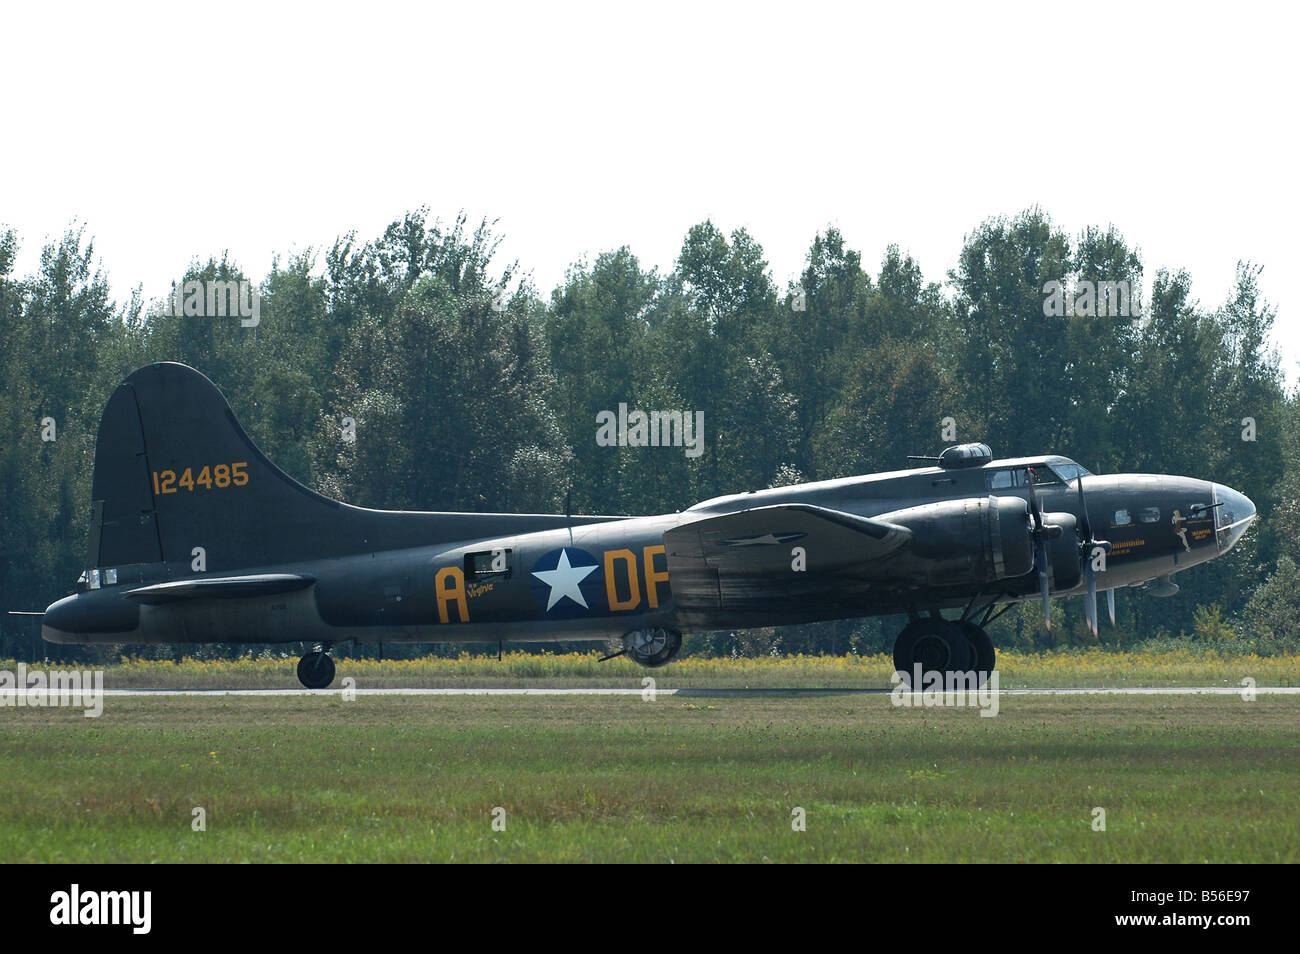 B 17 Flying Fortress on runway. Stock Photo